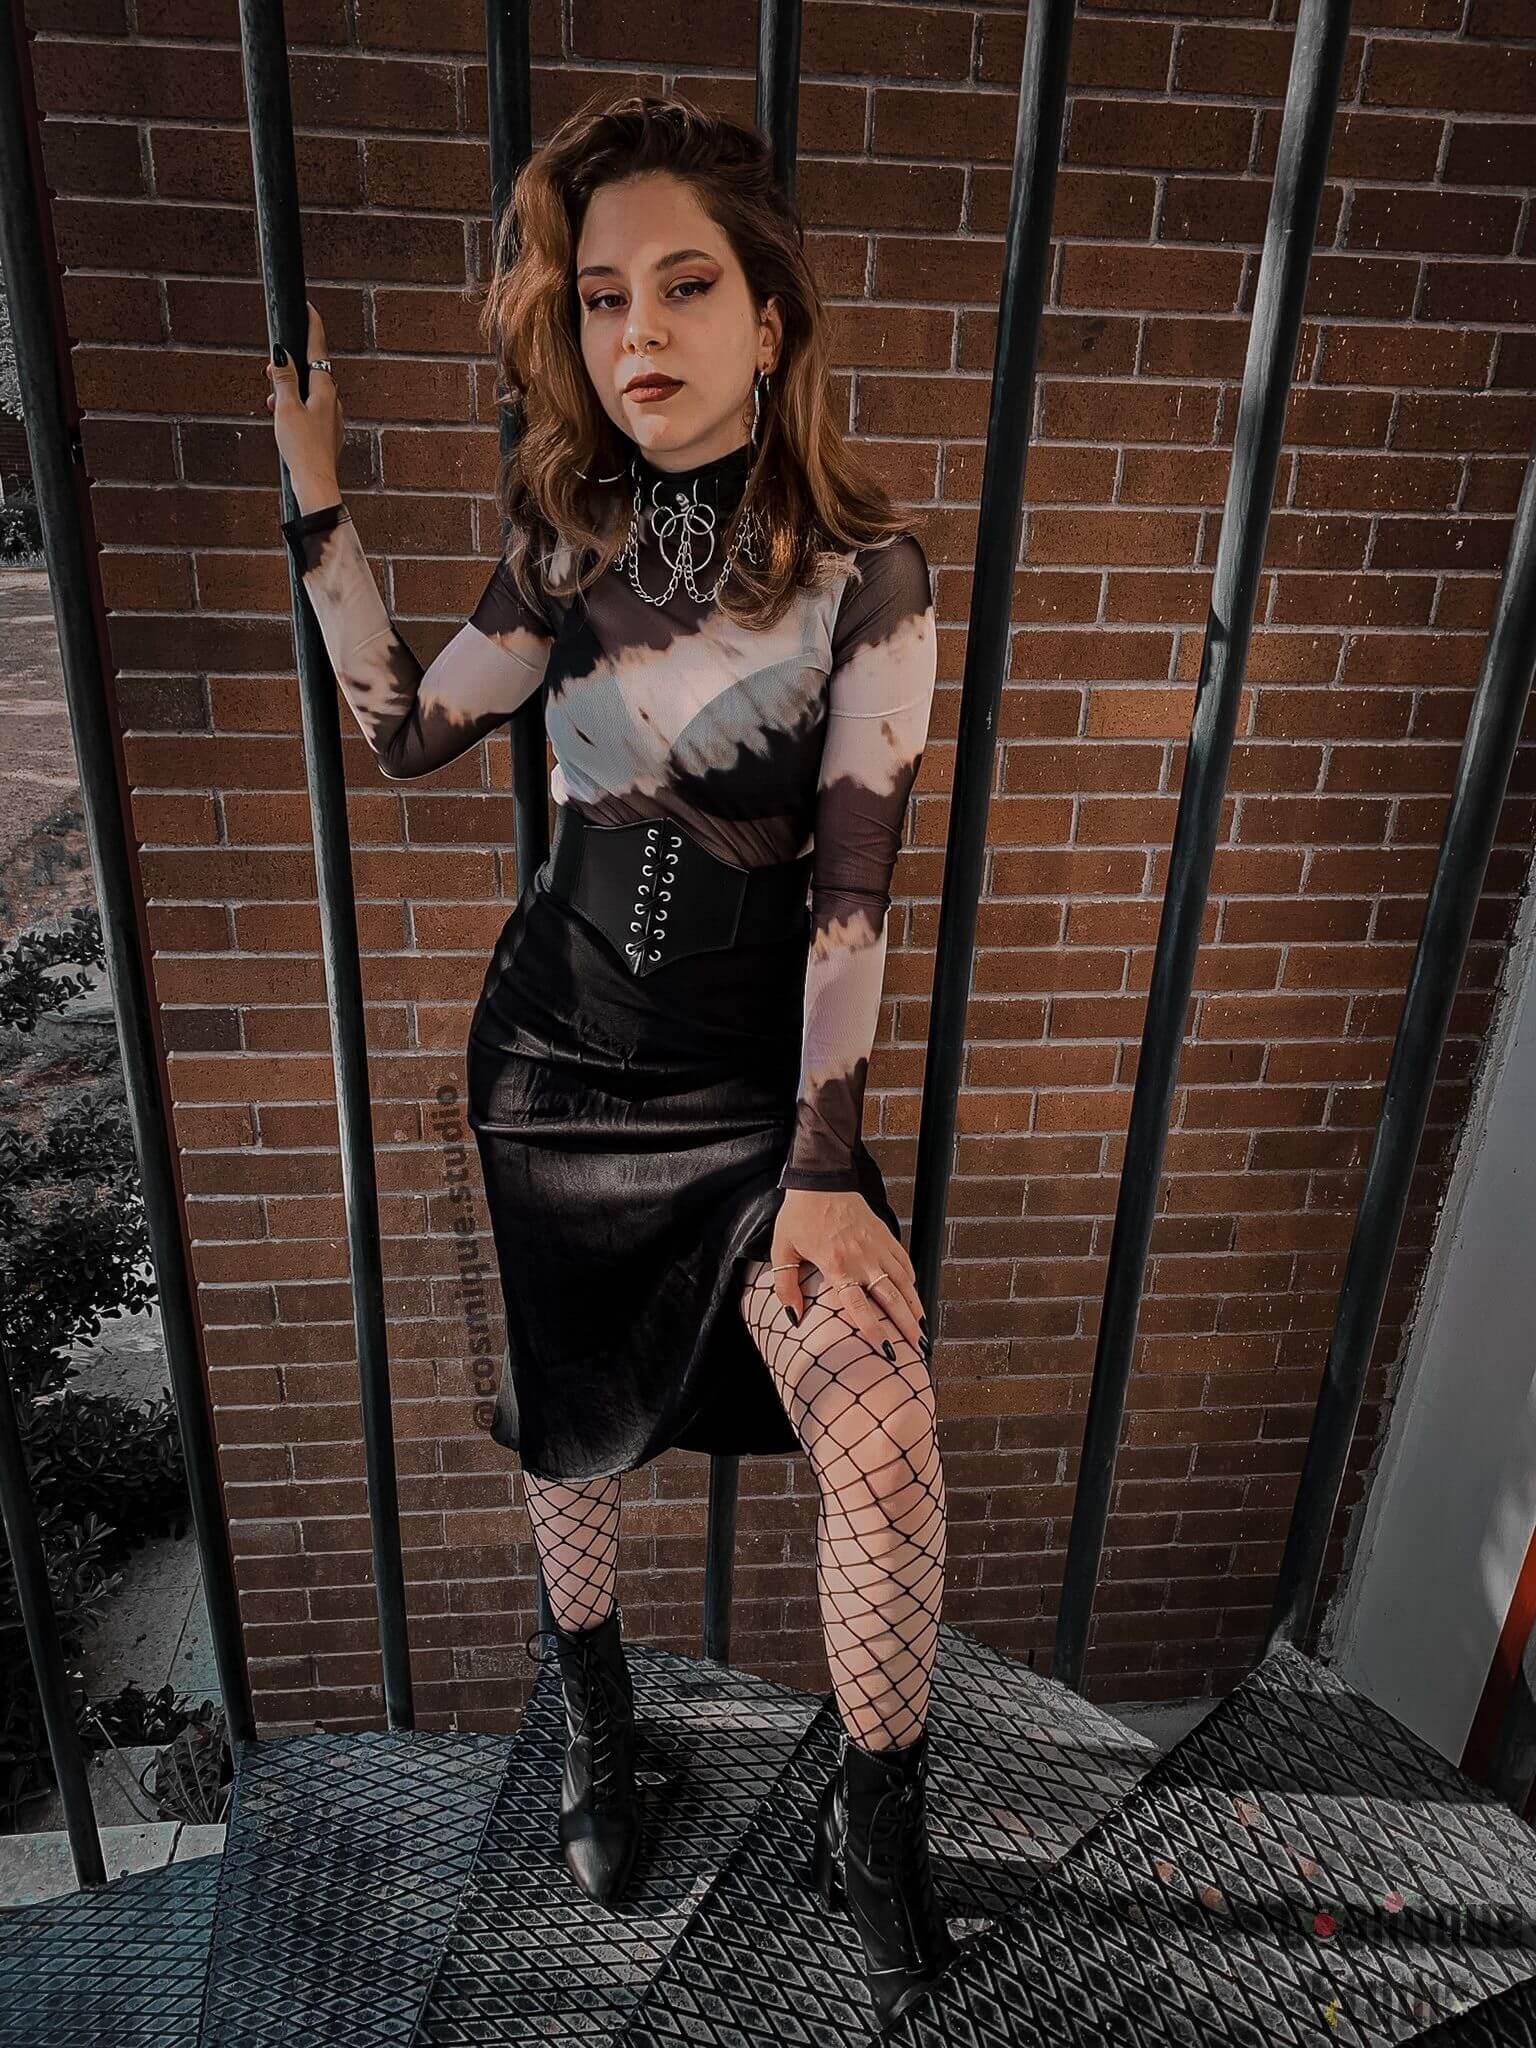 grunge girl standing on fire escape wearing animal print tulle blouse and black satin mini skirt completed with fishnet stockings, black leather corset and black leather choker 